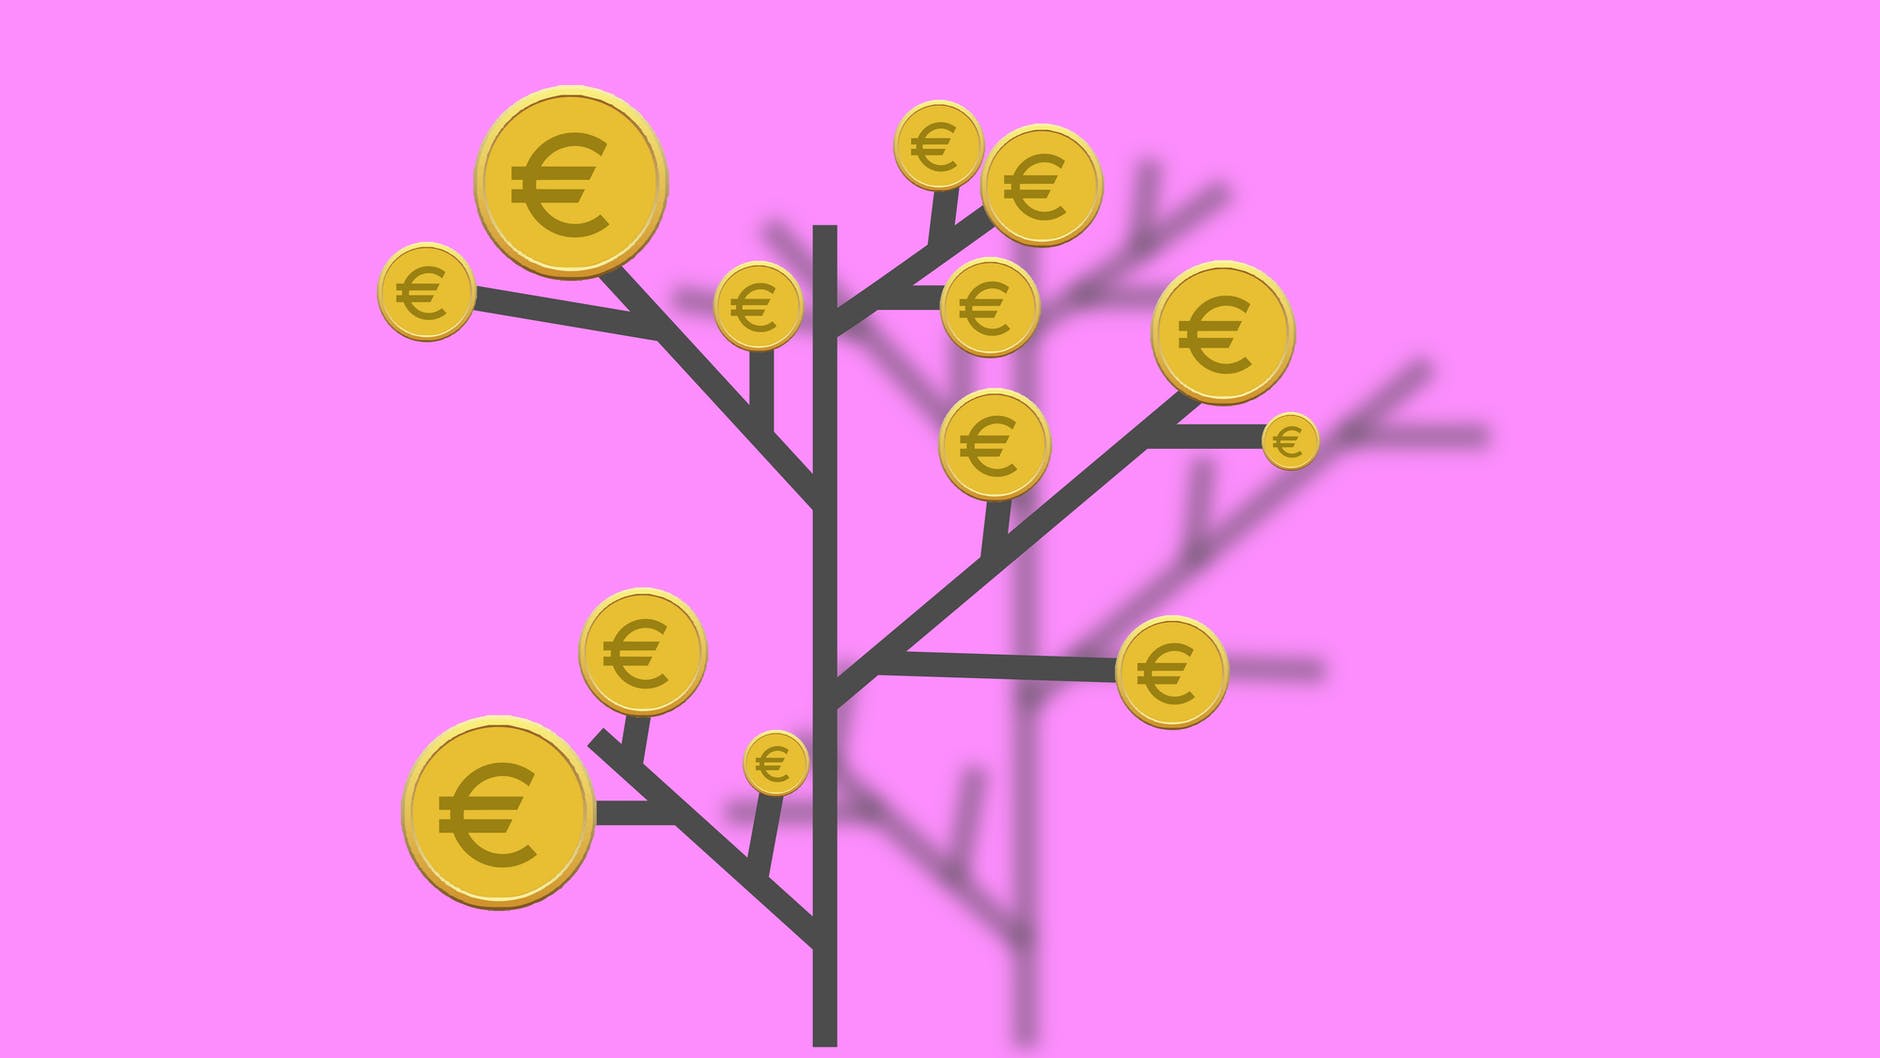 Coin tree